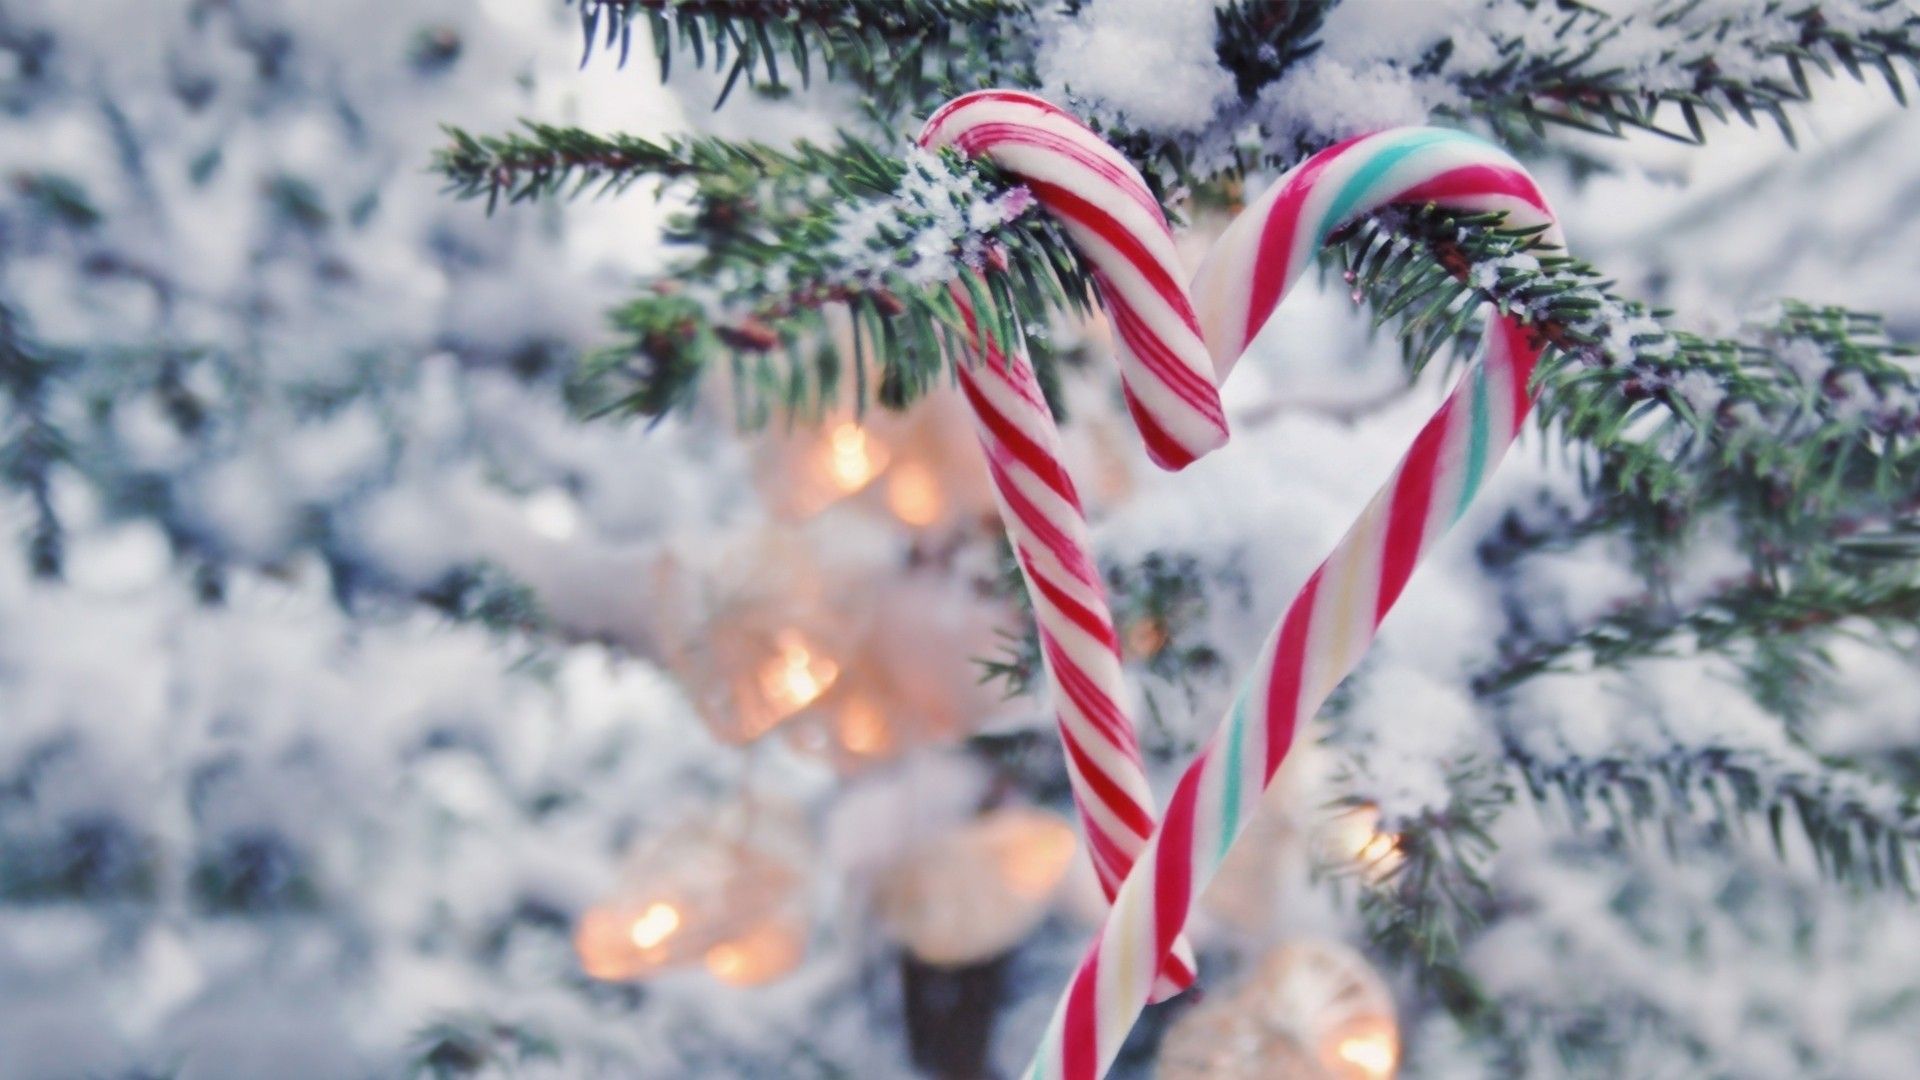 Two candy canes in the shape of a heart hanging from a snowy Christmas tree - Candy cane